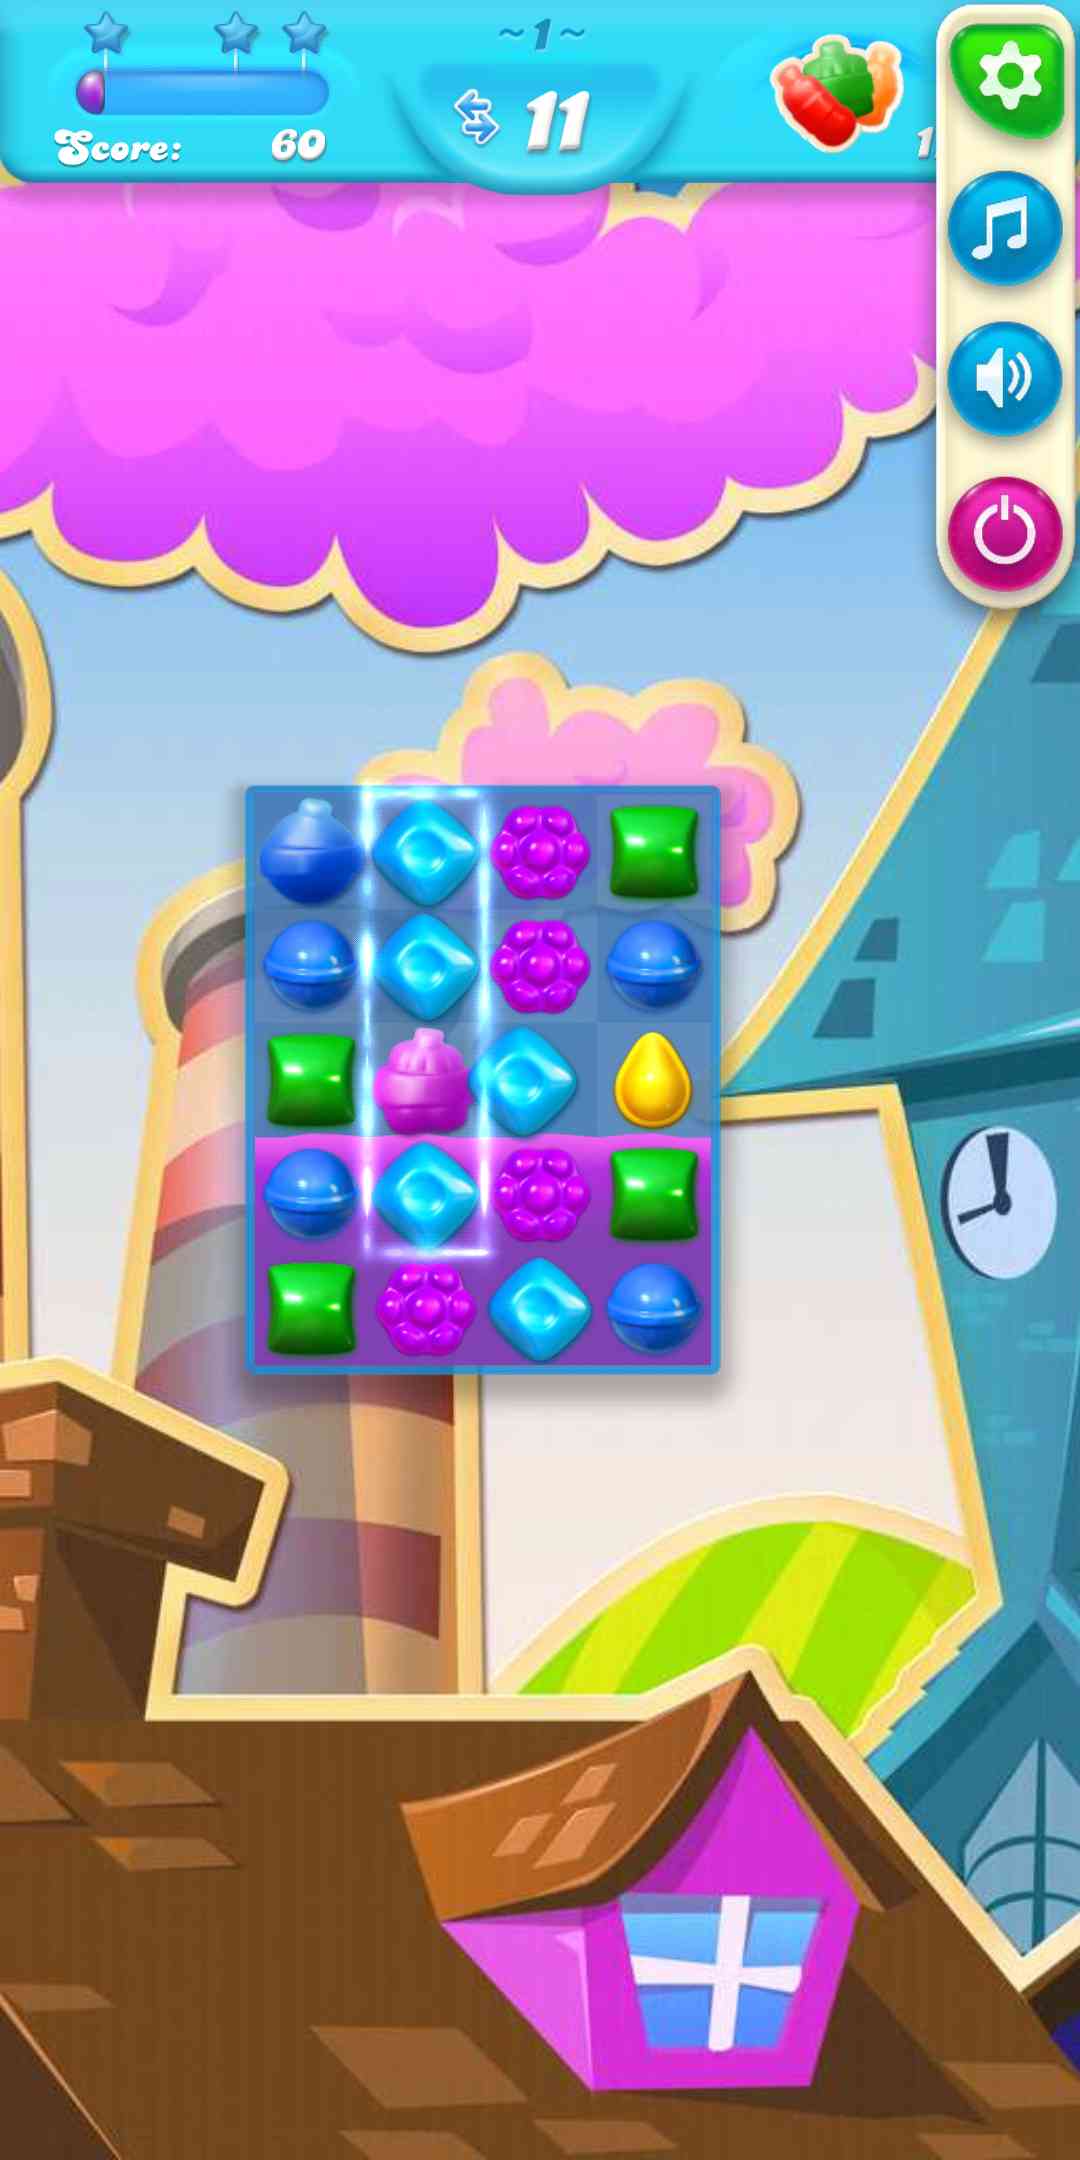 candy crush soda saga mod apk unlimited lives and boosters download